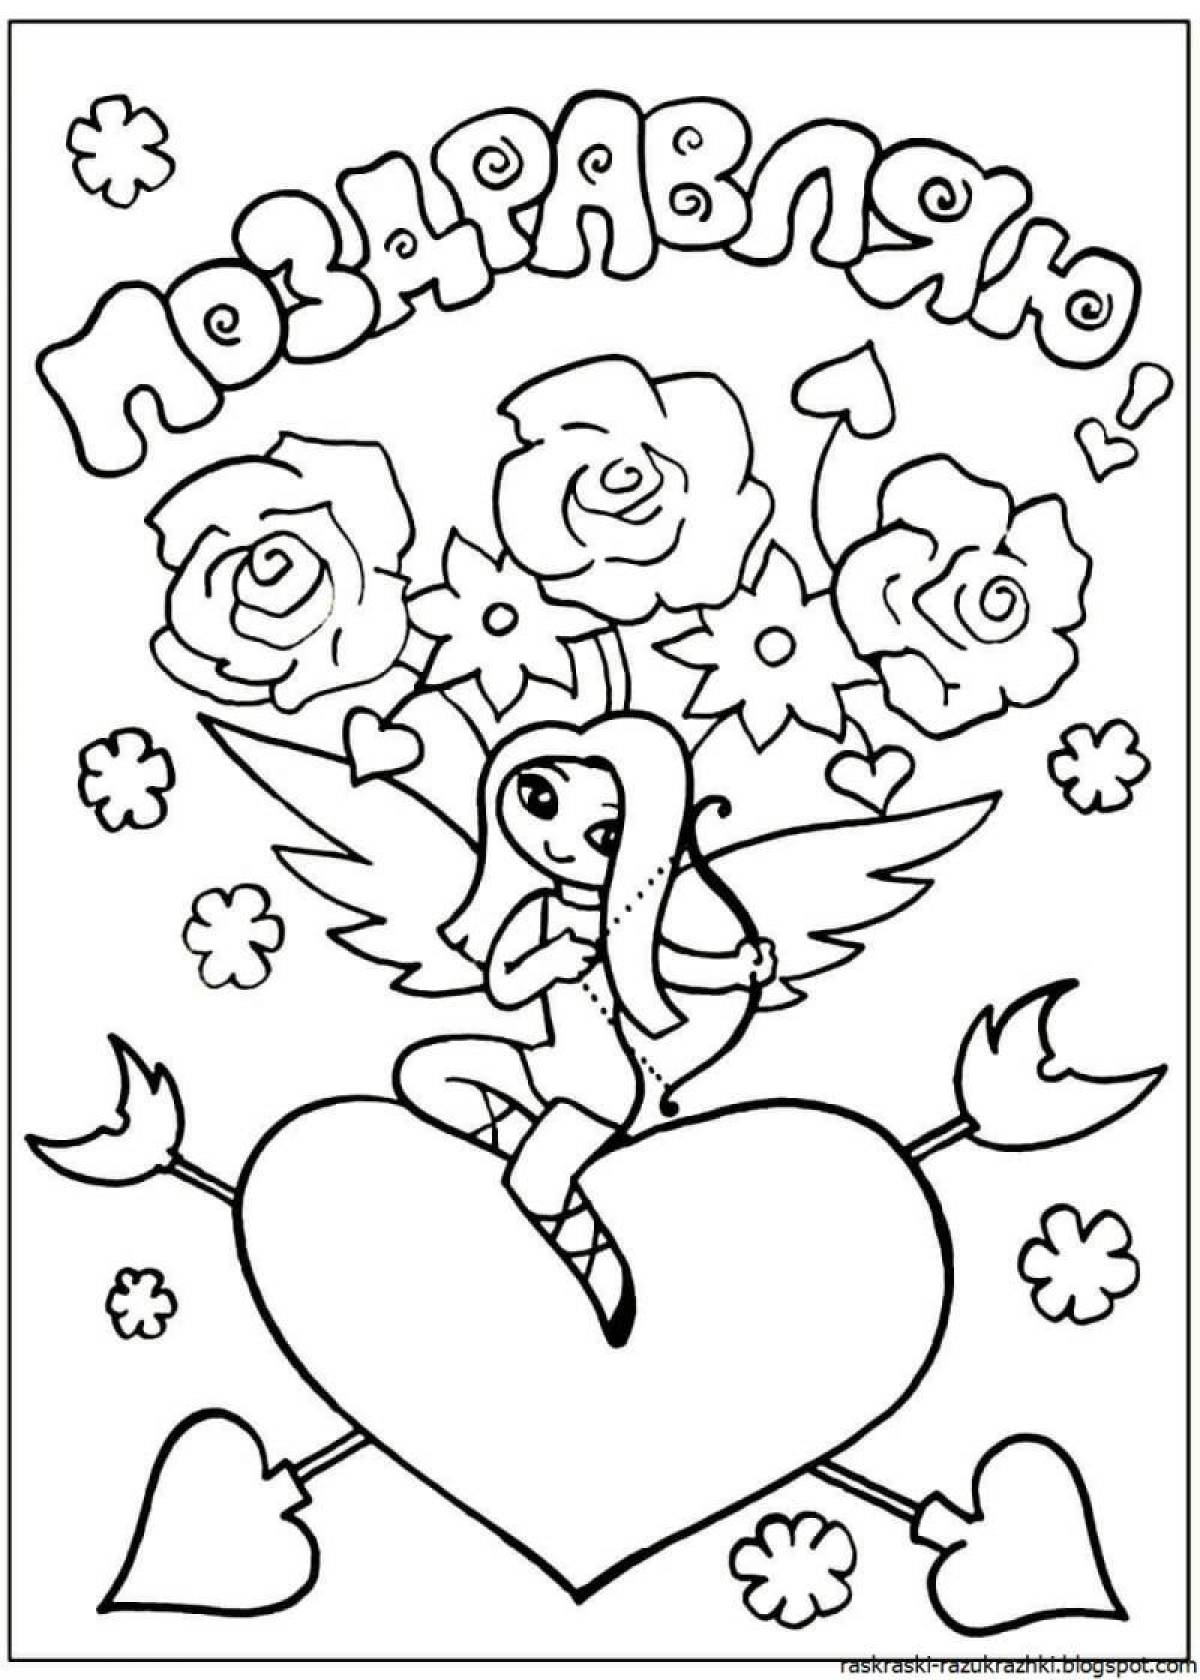 Coloring page of an enthusiastic postcard